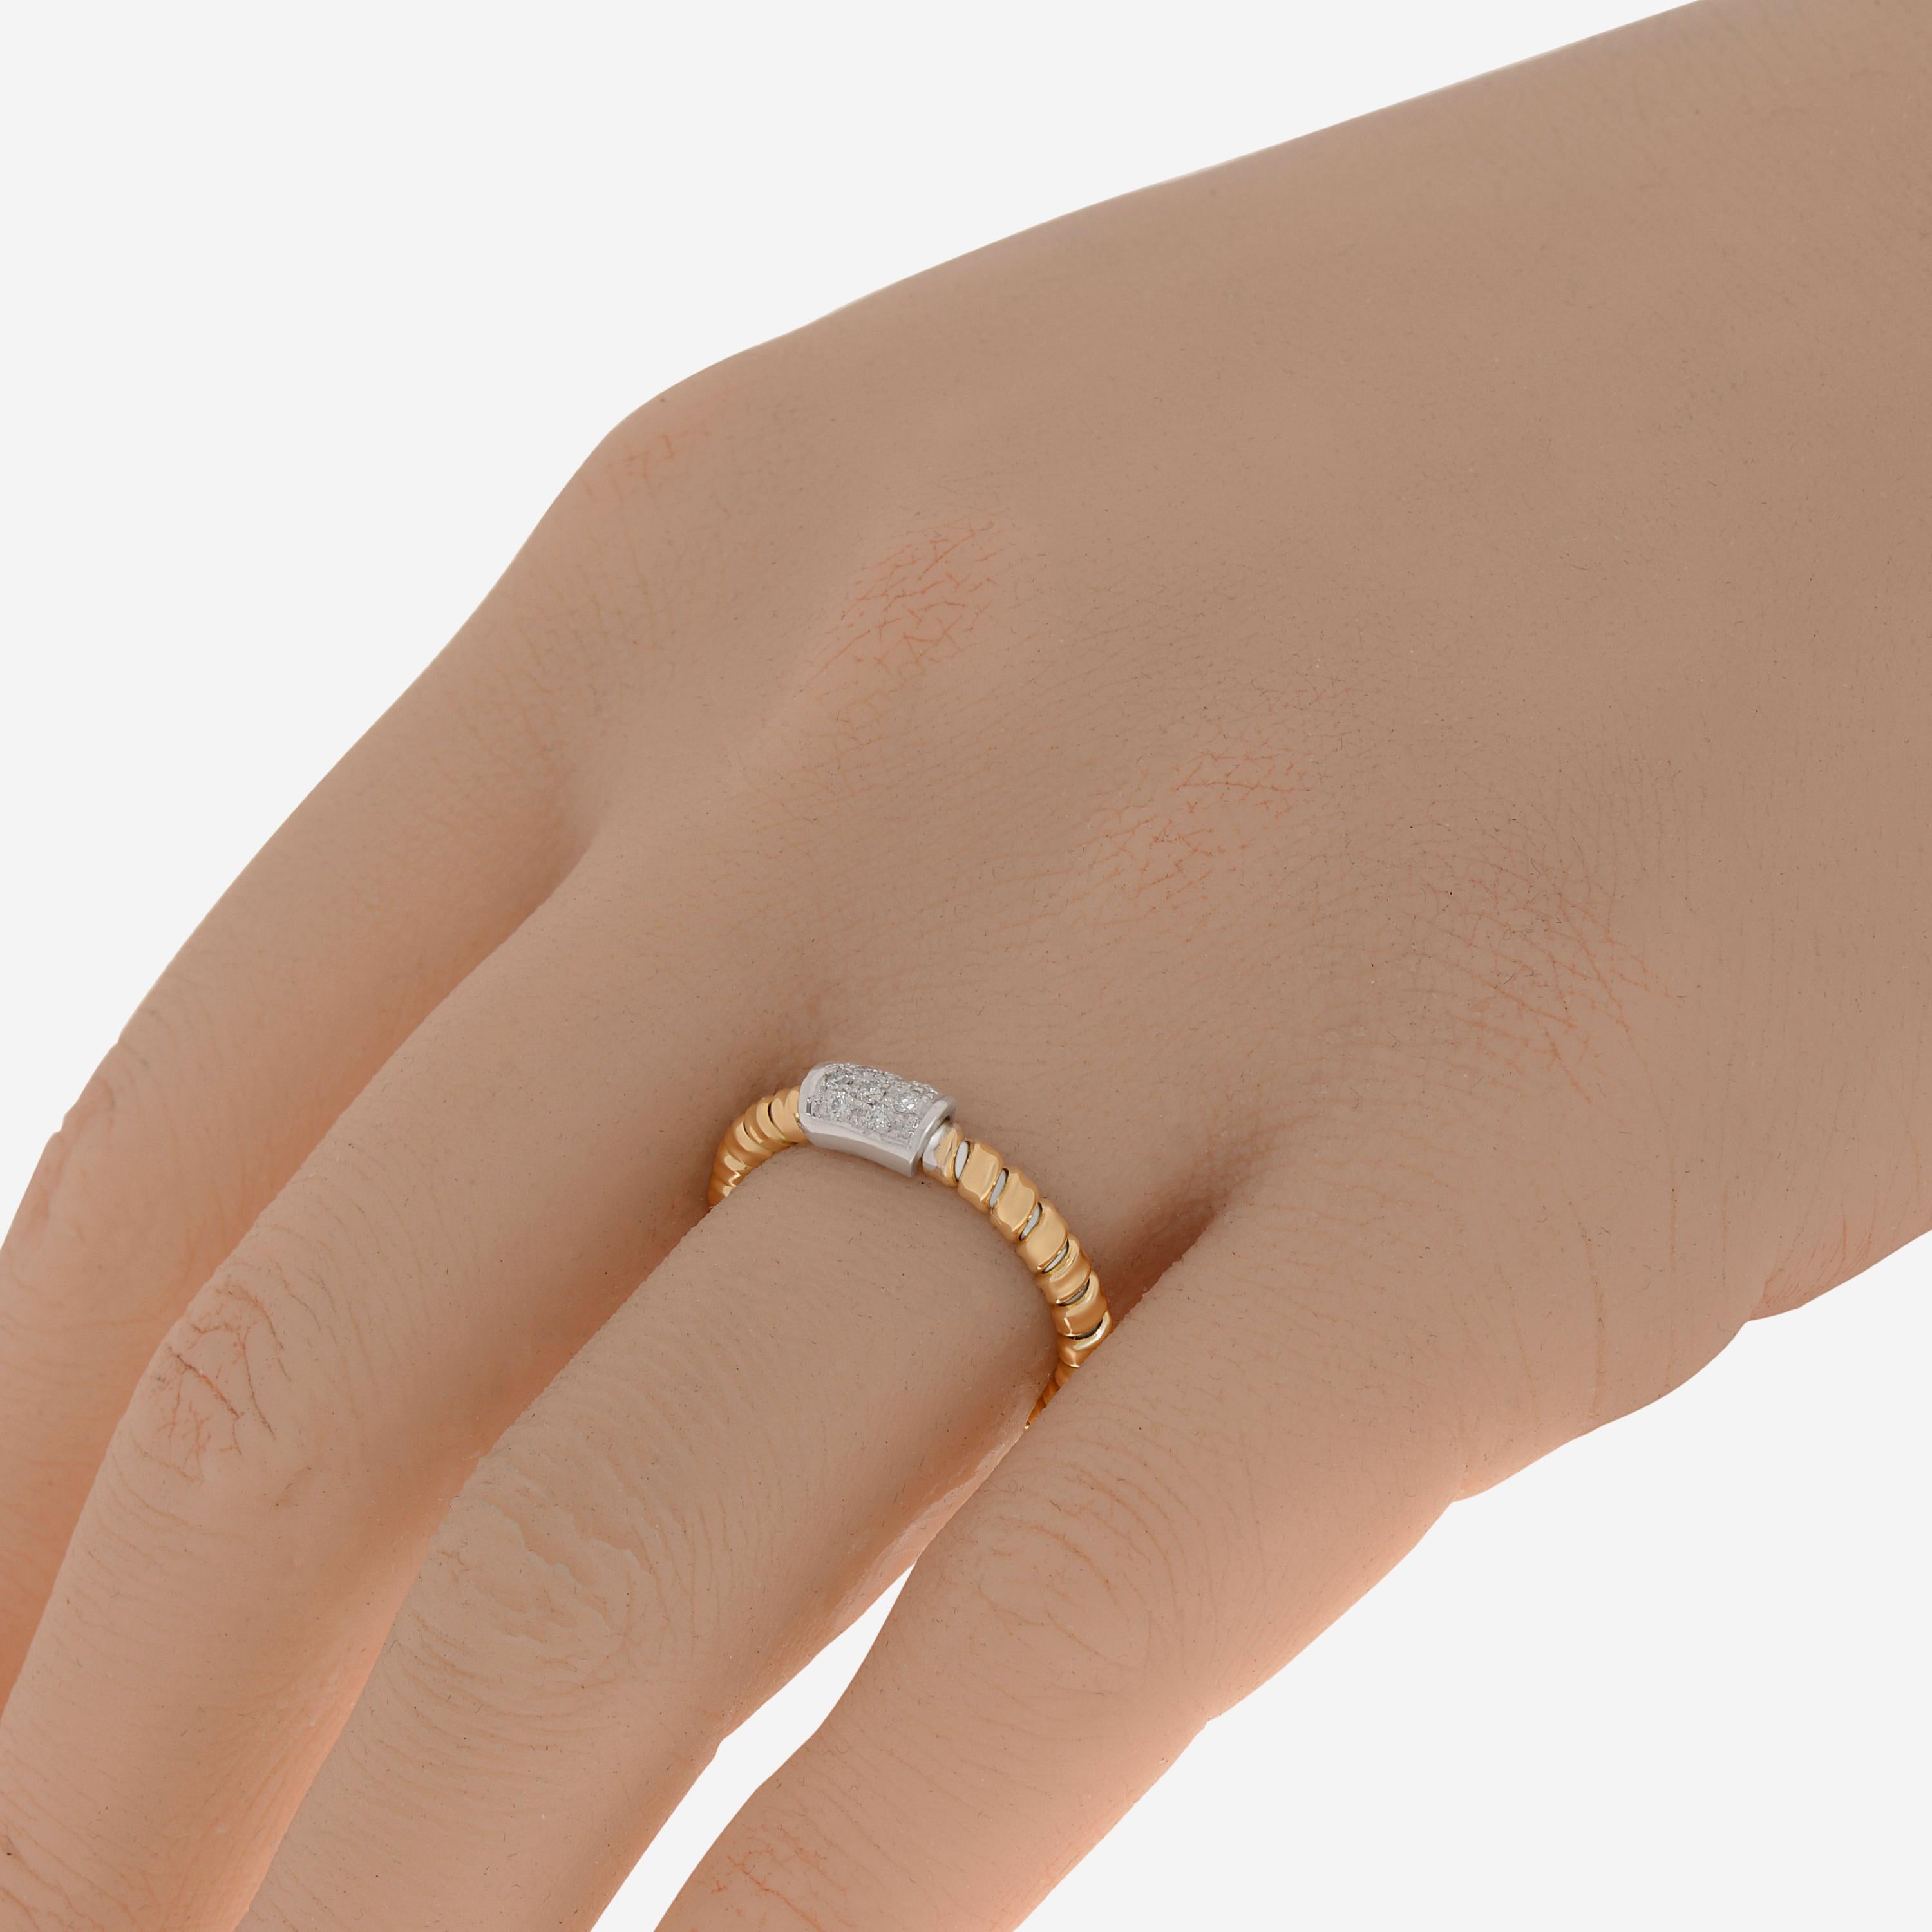 Tessitore Tubogas 18K yellow gold band ring features traditional tubogas details set with 0.08ct. tw. diamonds. The ring size is 5.5 (50.6). The band width is 1/8